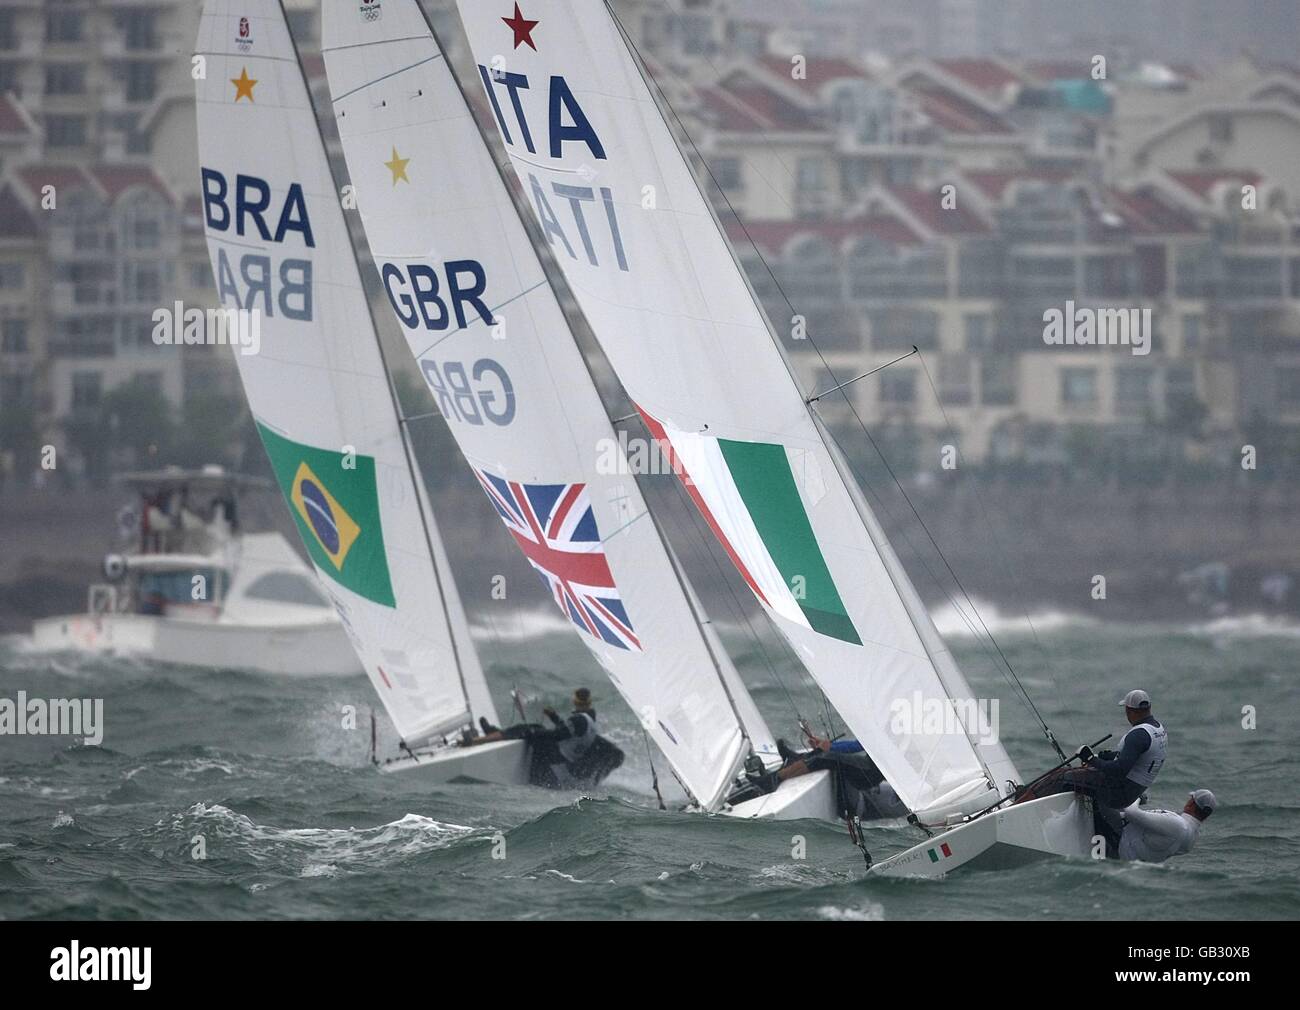 (l-r) Brazil's Robert Scheidt and Bruno Prada, Great Britain's Iain Percy and Andrew Simpson and Italy's Diego Negri and Luigi Viale sail in the final race of the Men's Star class at the Qingdao Olympic Sailing Center on day 13 of the 2008 Olympic Games in Beijing. Stock Photo